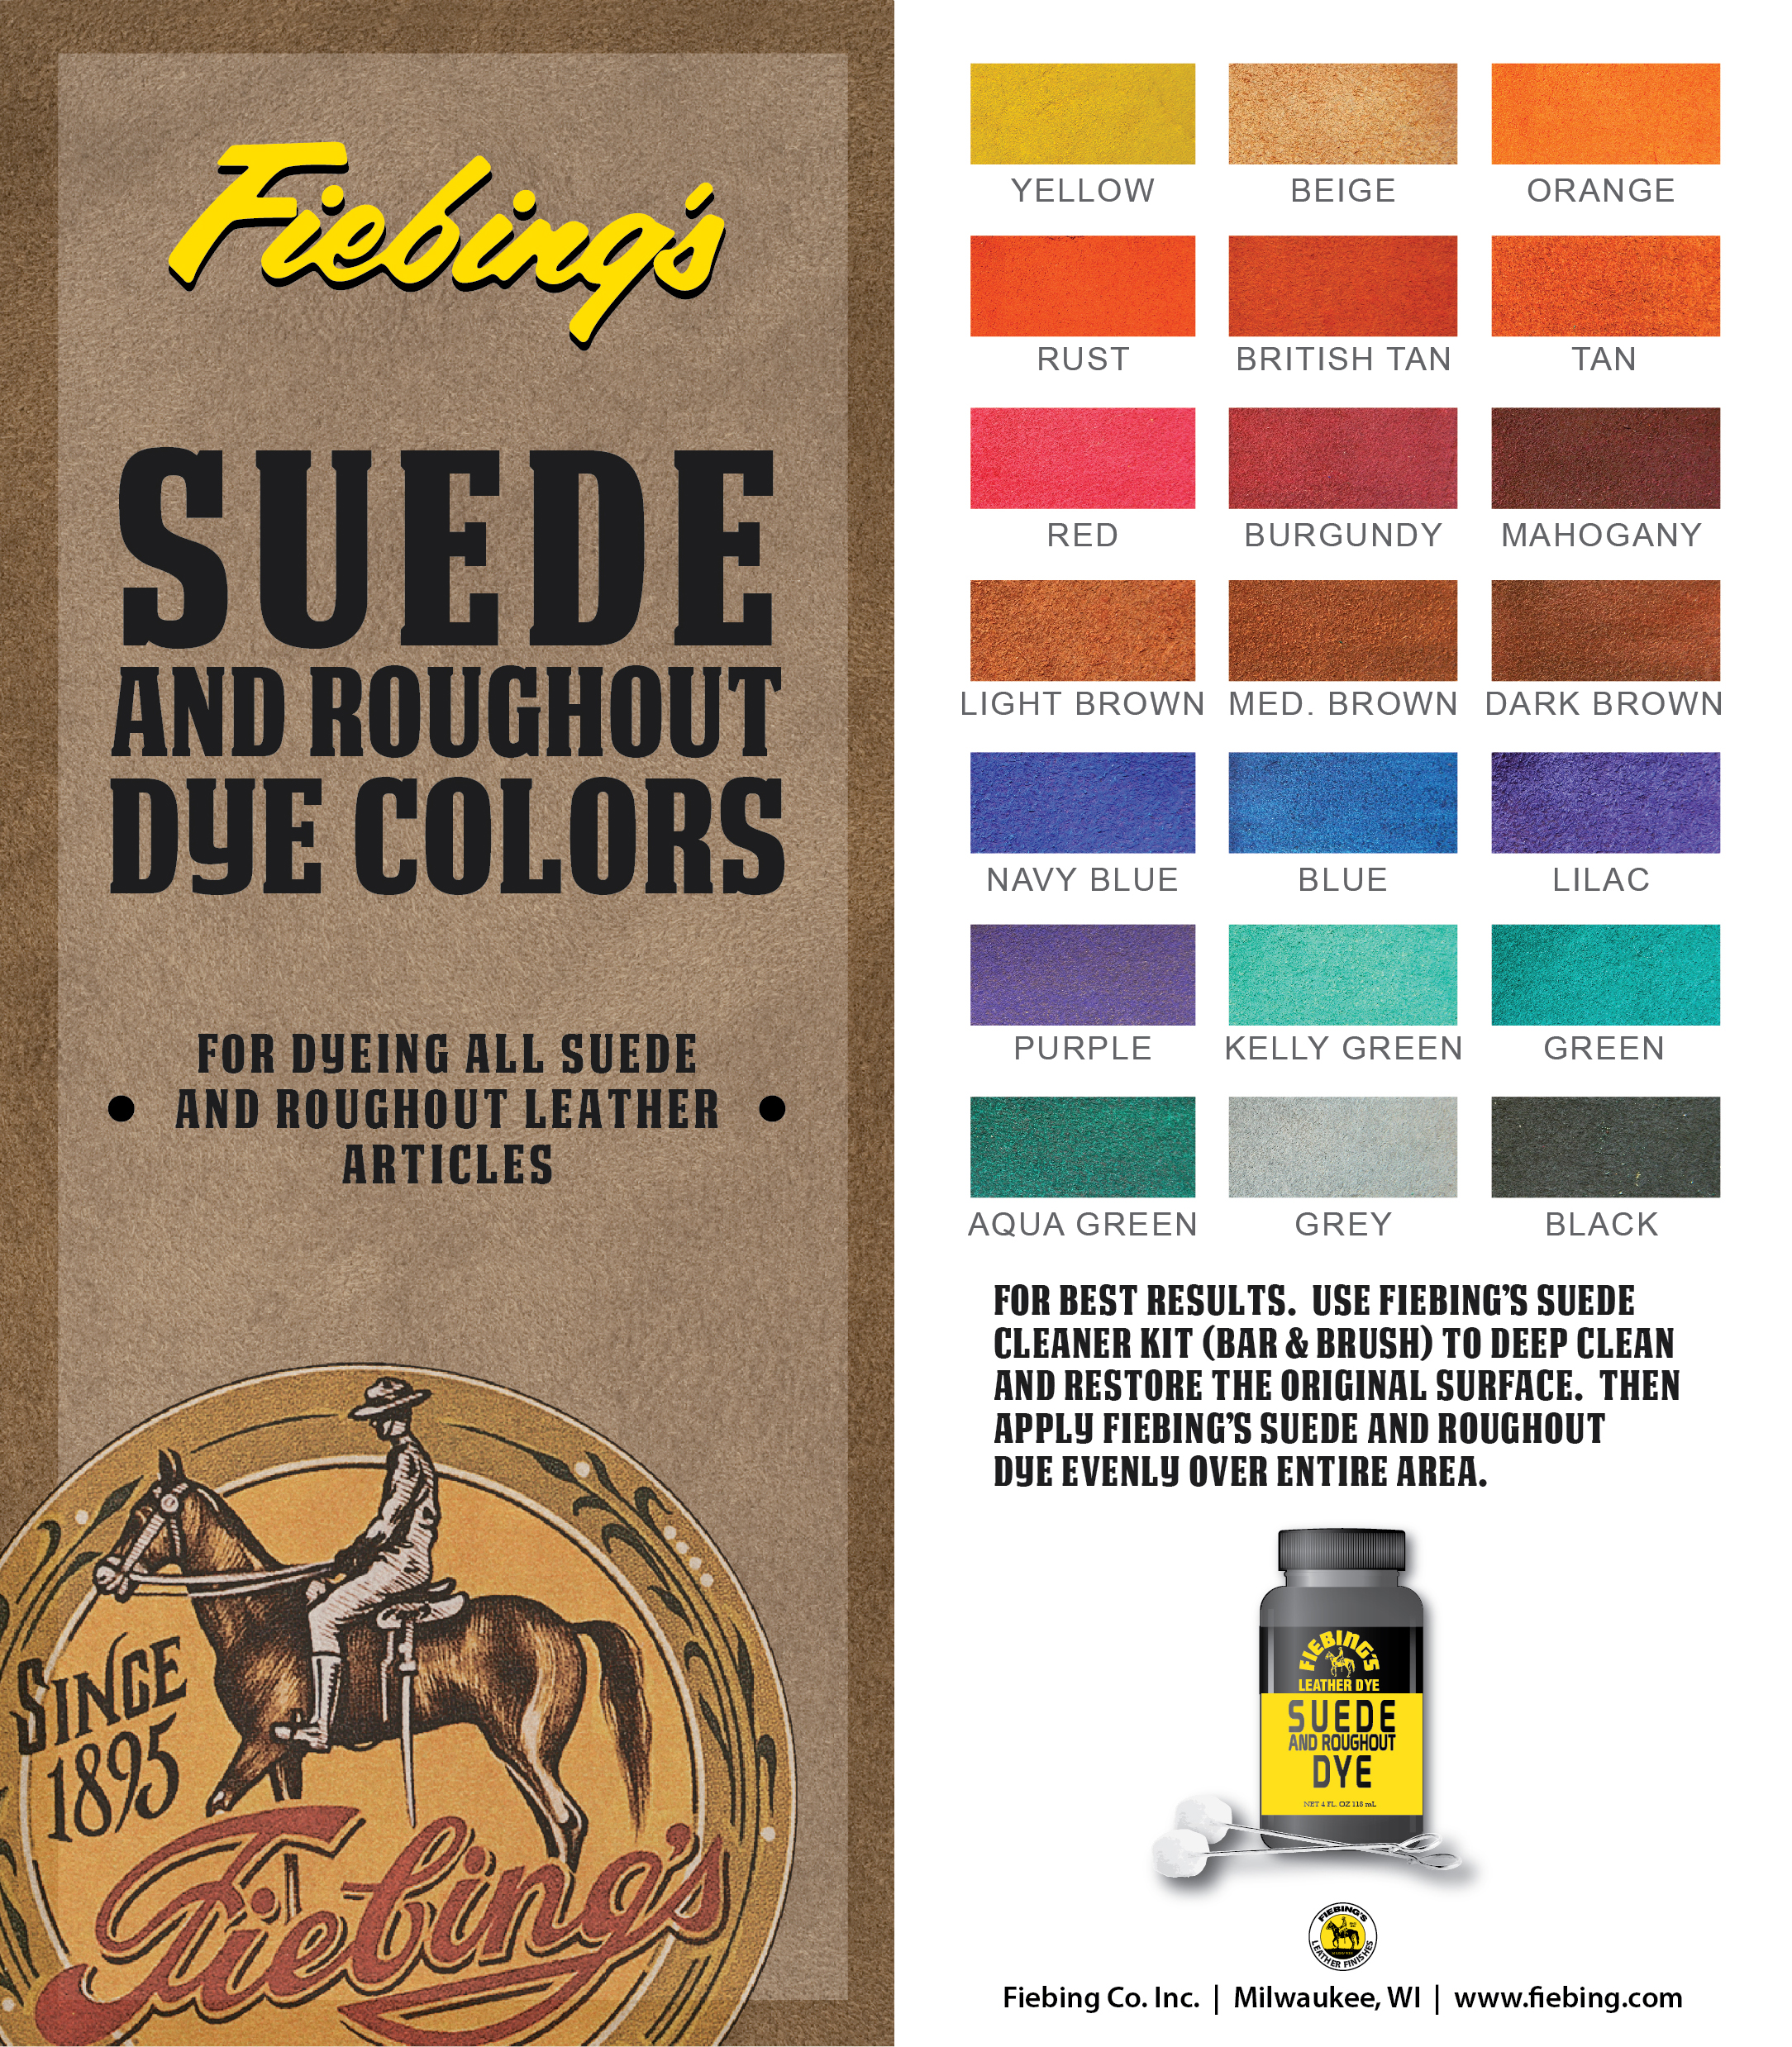 Fiebing's Black Suede Dye (4oz) - Brightens and Restores Roughout Leather  Shoes - Remains Flexible When Dry, Won't Crack or Peel - Dye is Permanent